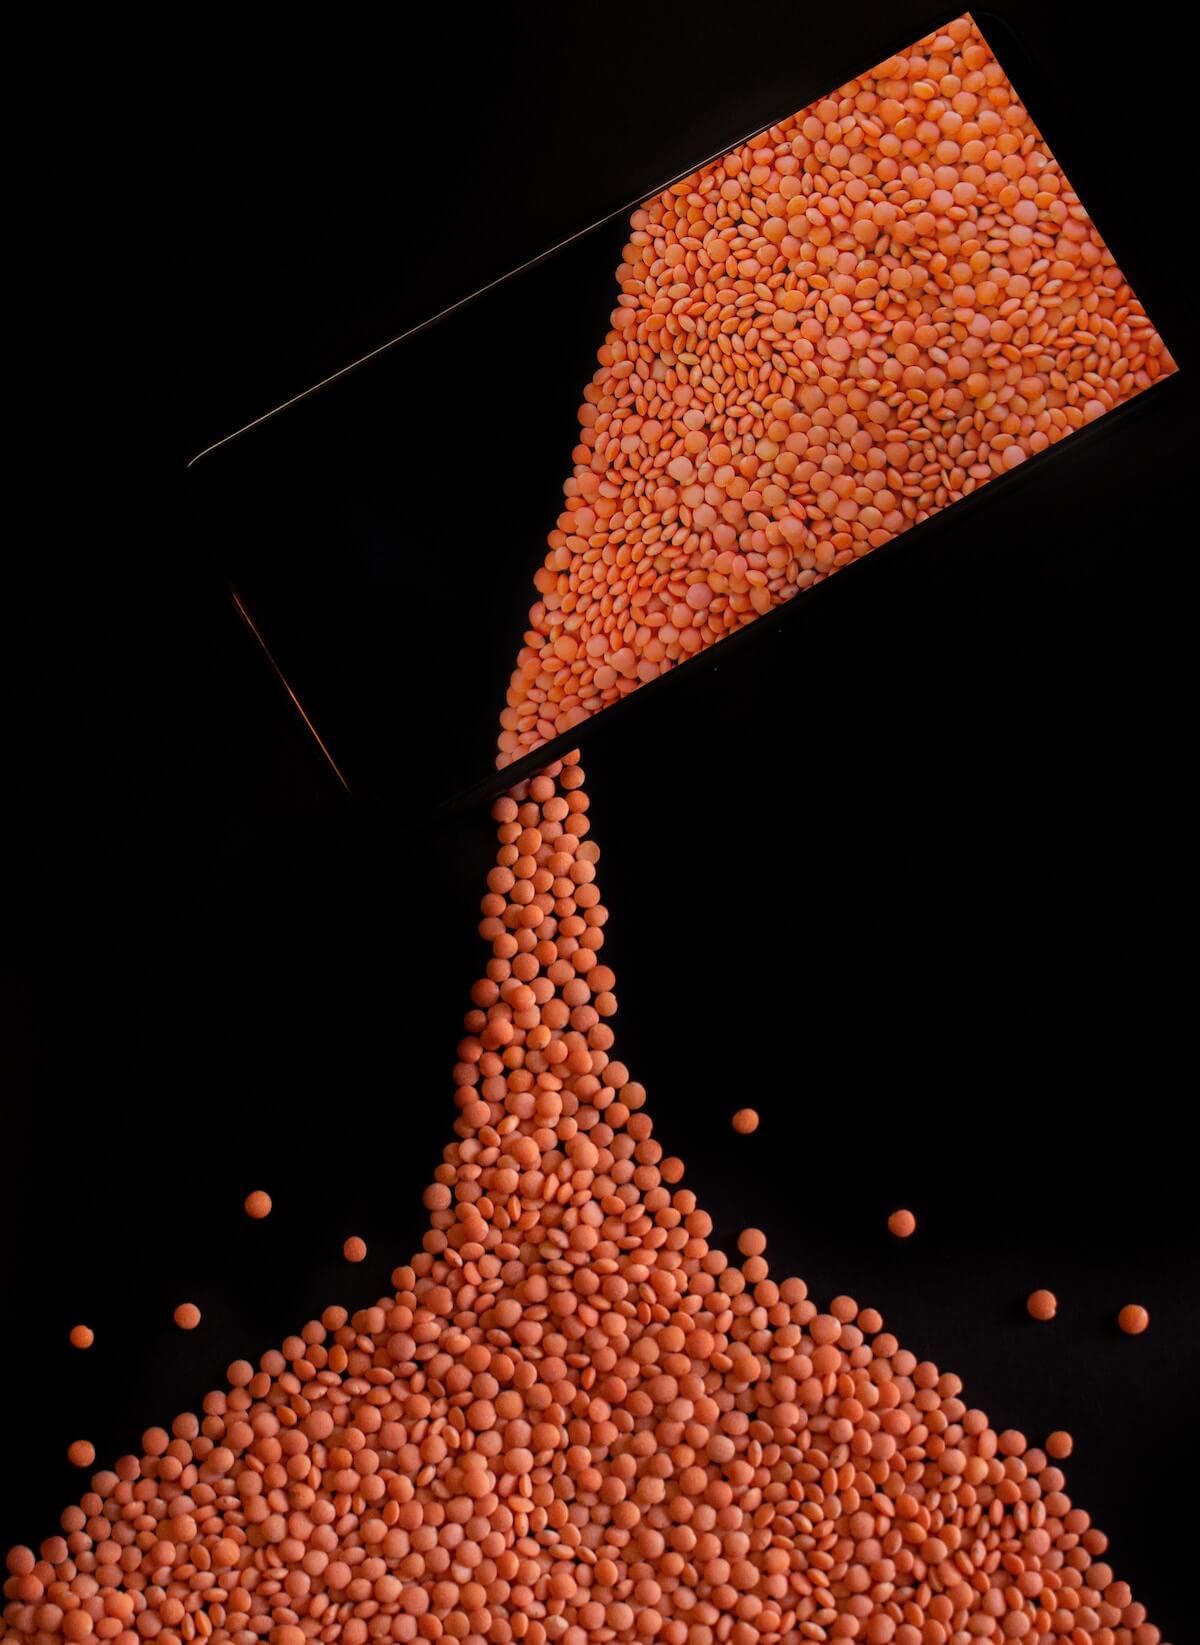 red lentils being poured to a black background from a seethrough glass jar